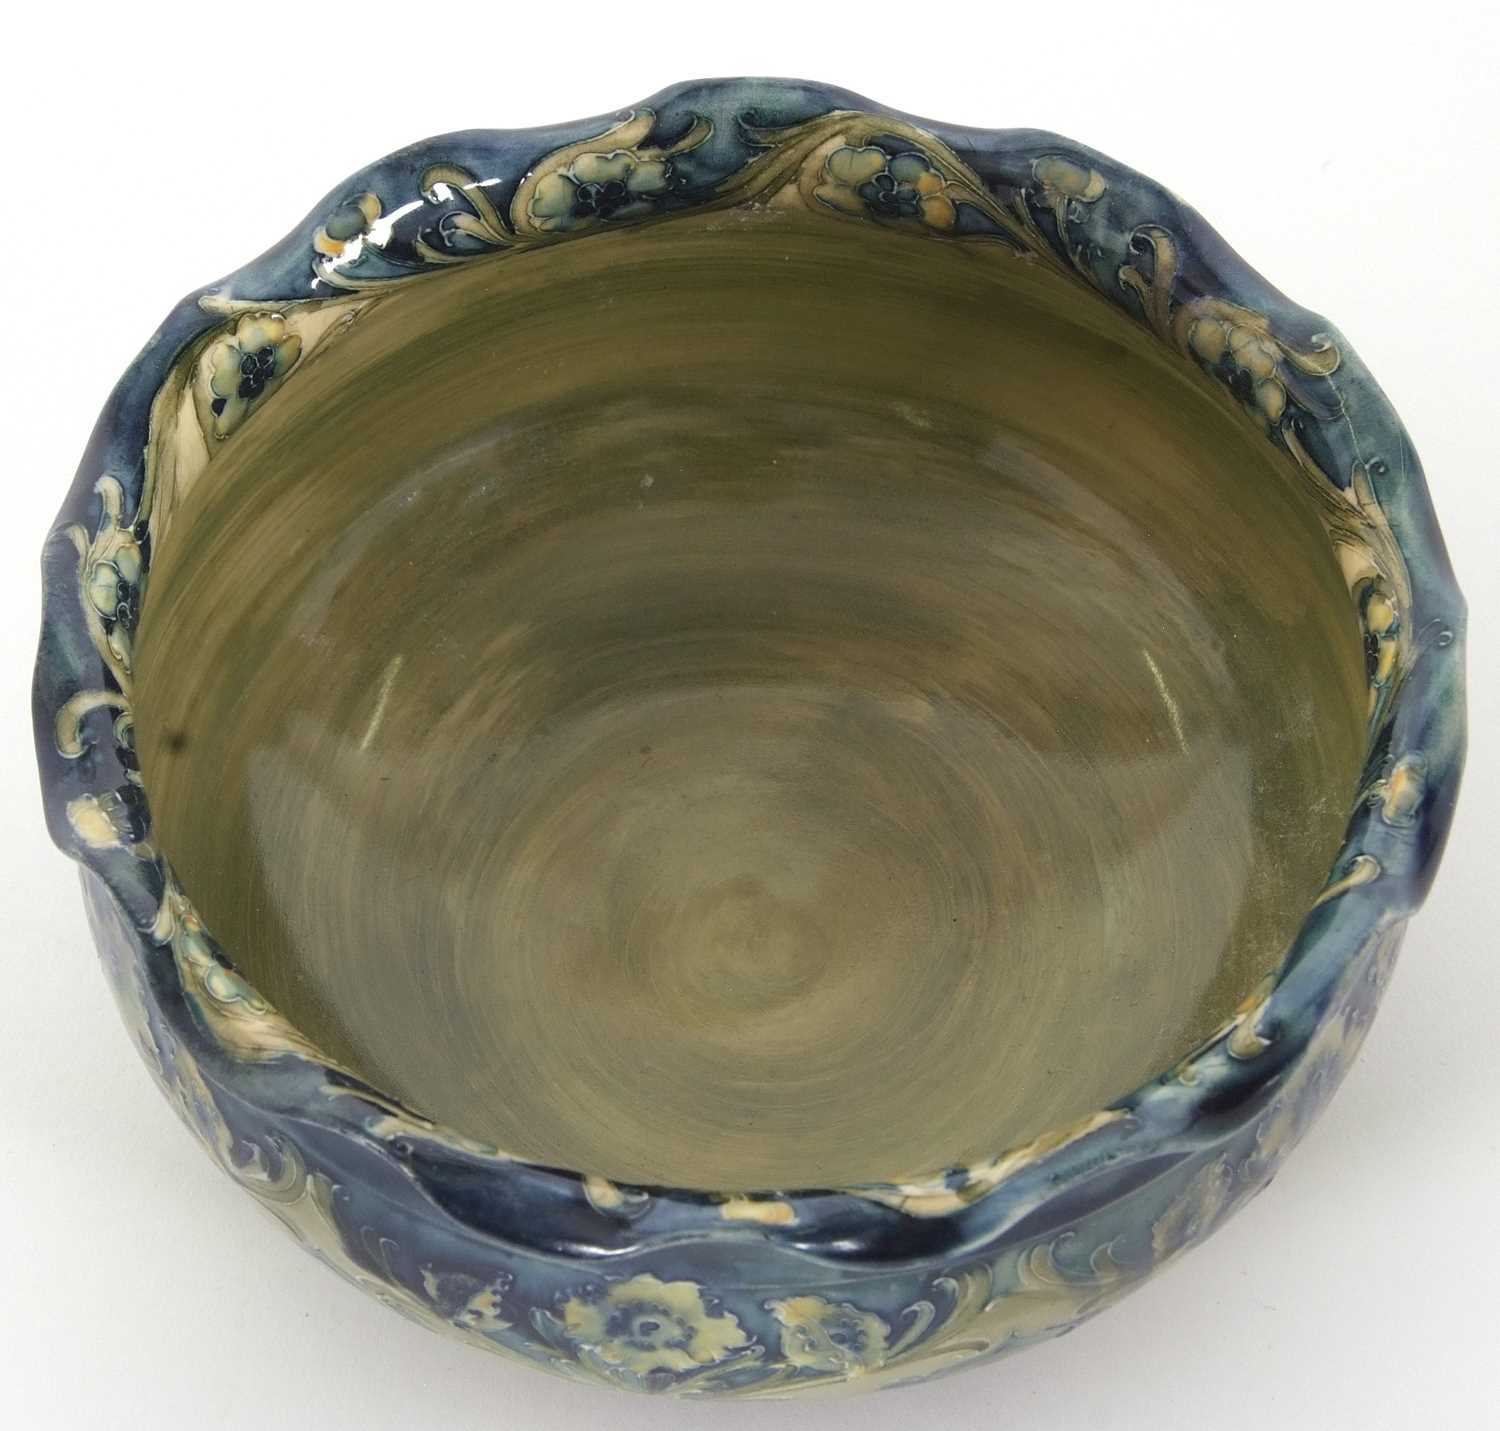 A Moorcroft Florian ware bowl made for Liberty with a Art Nouveau stylised floral design in green - Image 2 of 11